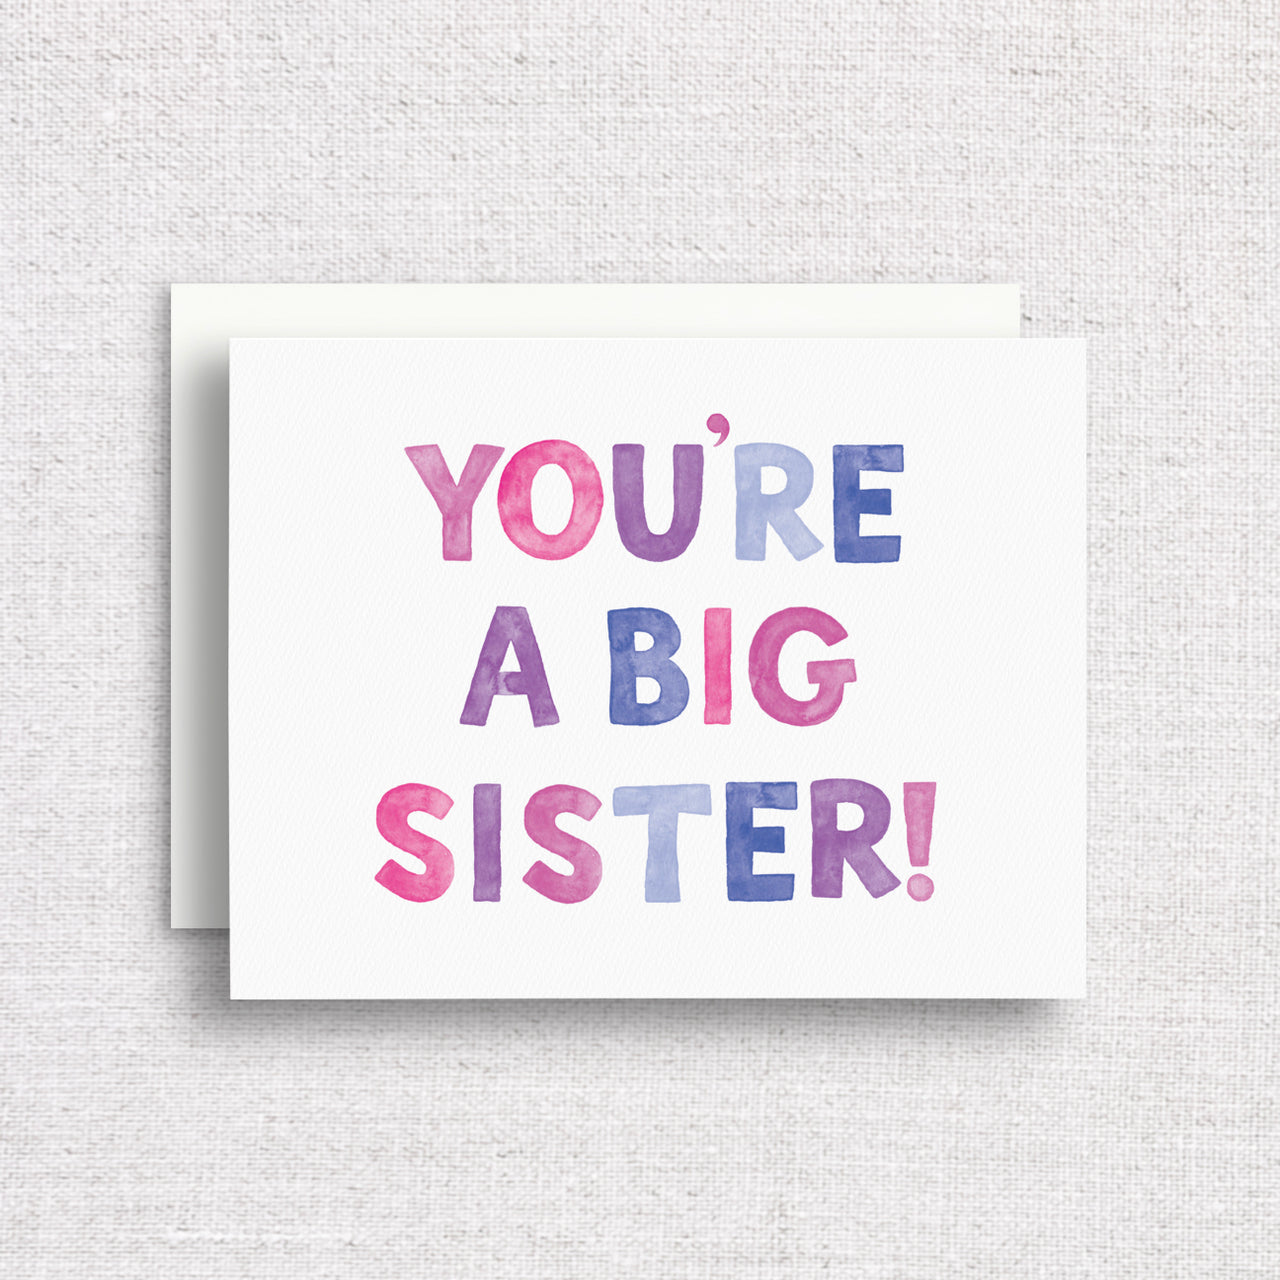 You're a Big Sister Greeting Card by Gert & Co